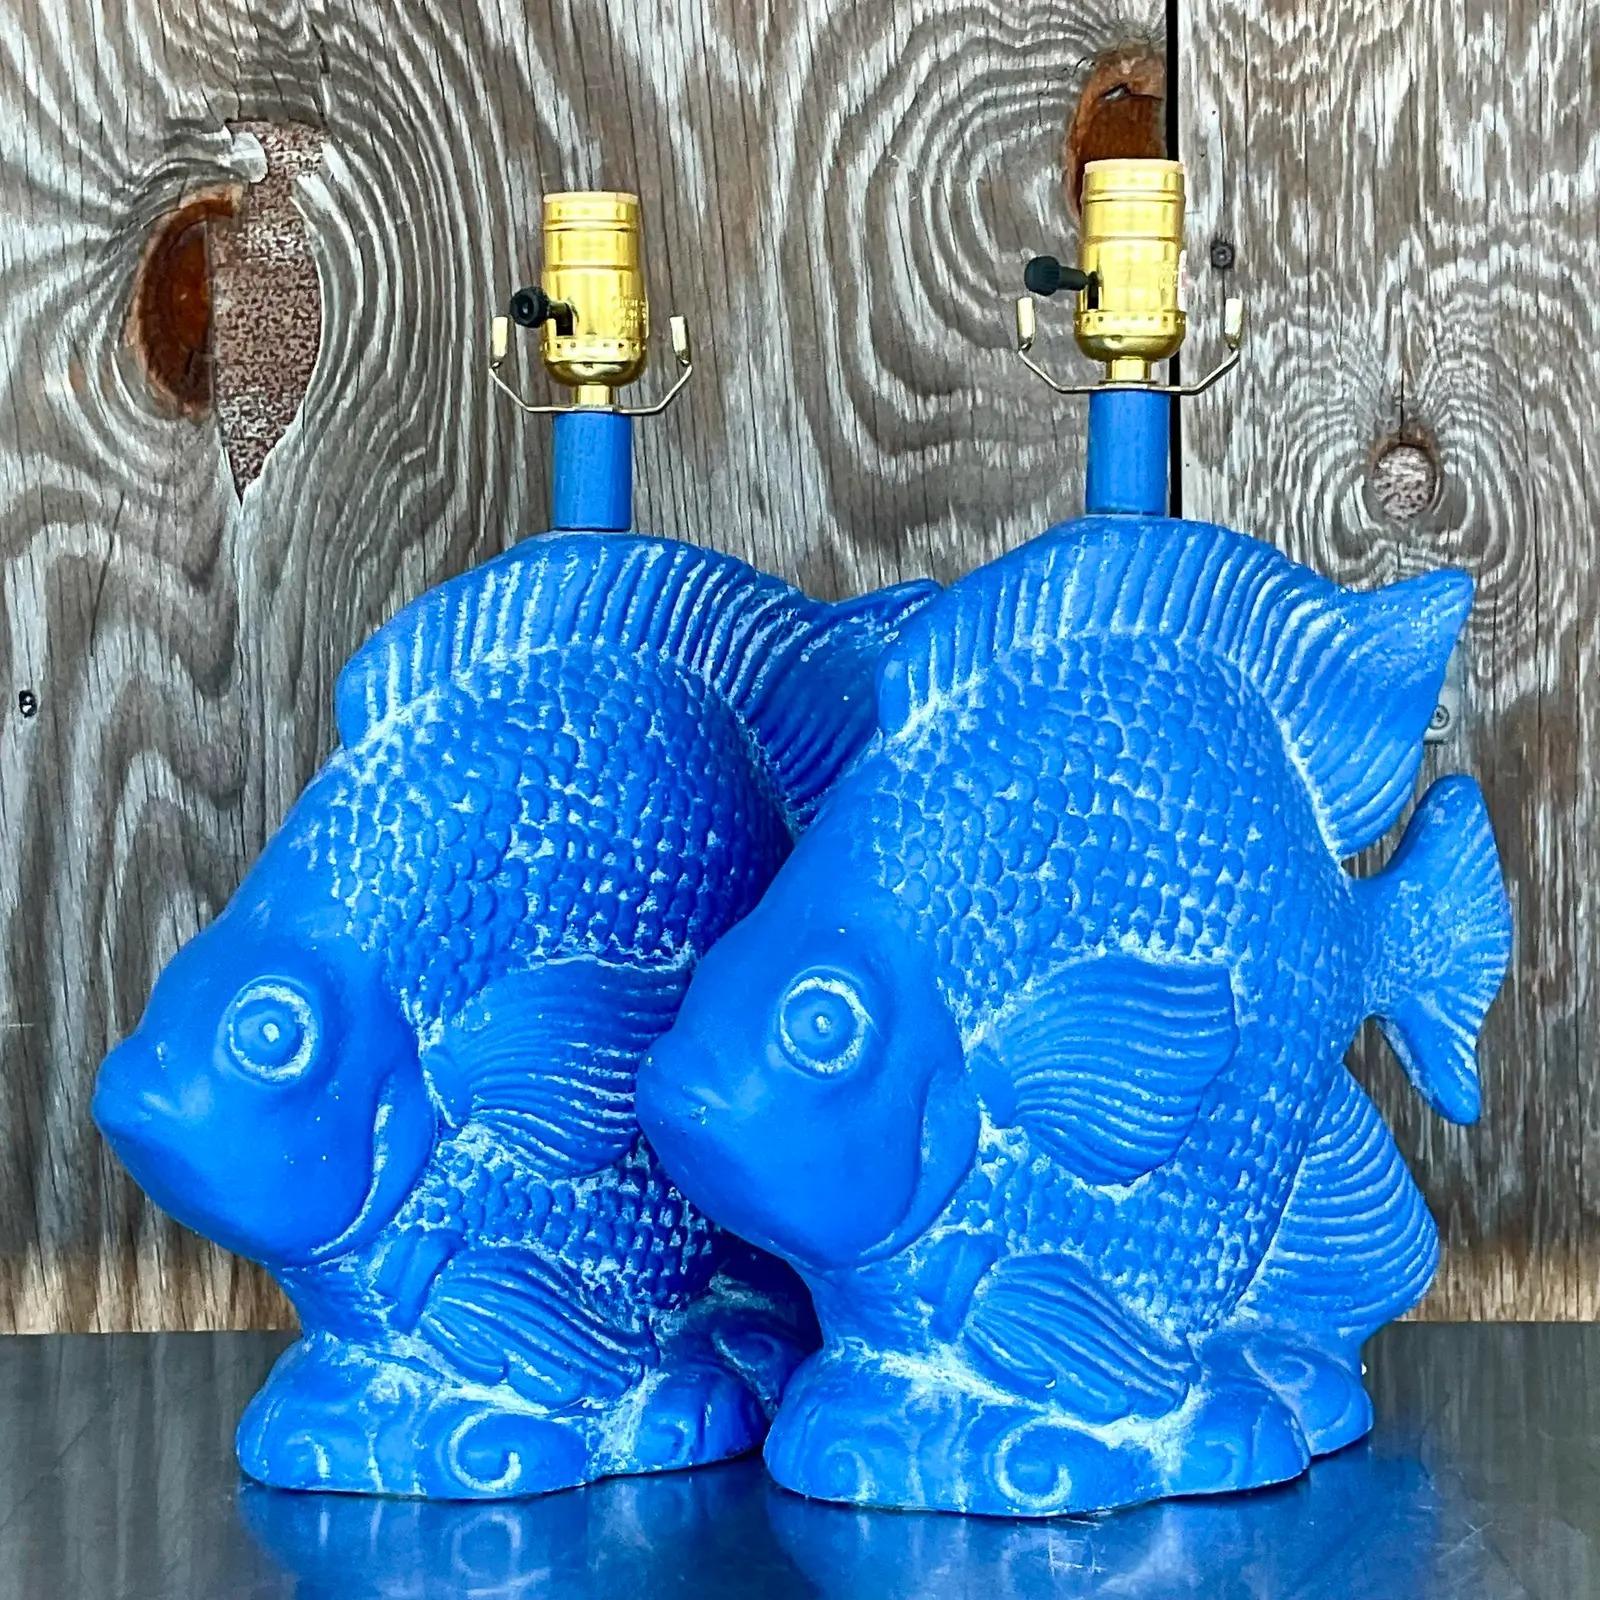 Fabulous pair of vintage Coastal table lamps. A brilliant blue color really makes these lamps a standout. Acquired from a Palm Beach estate.